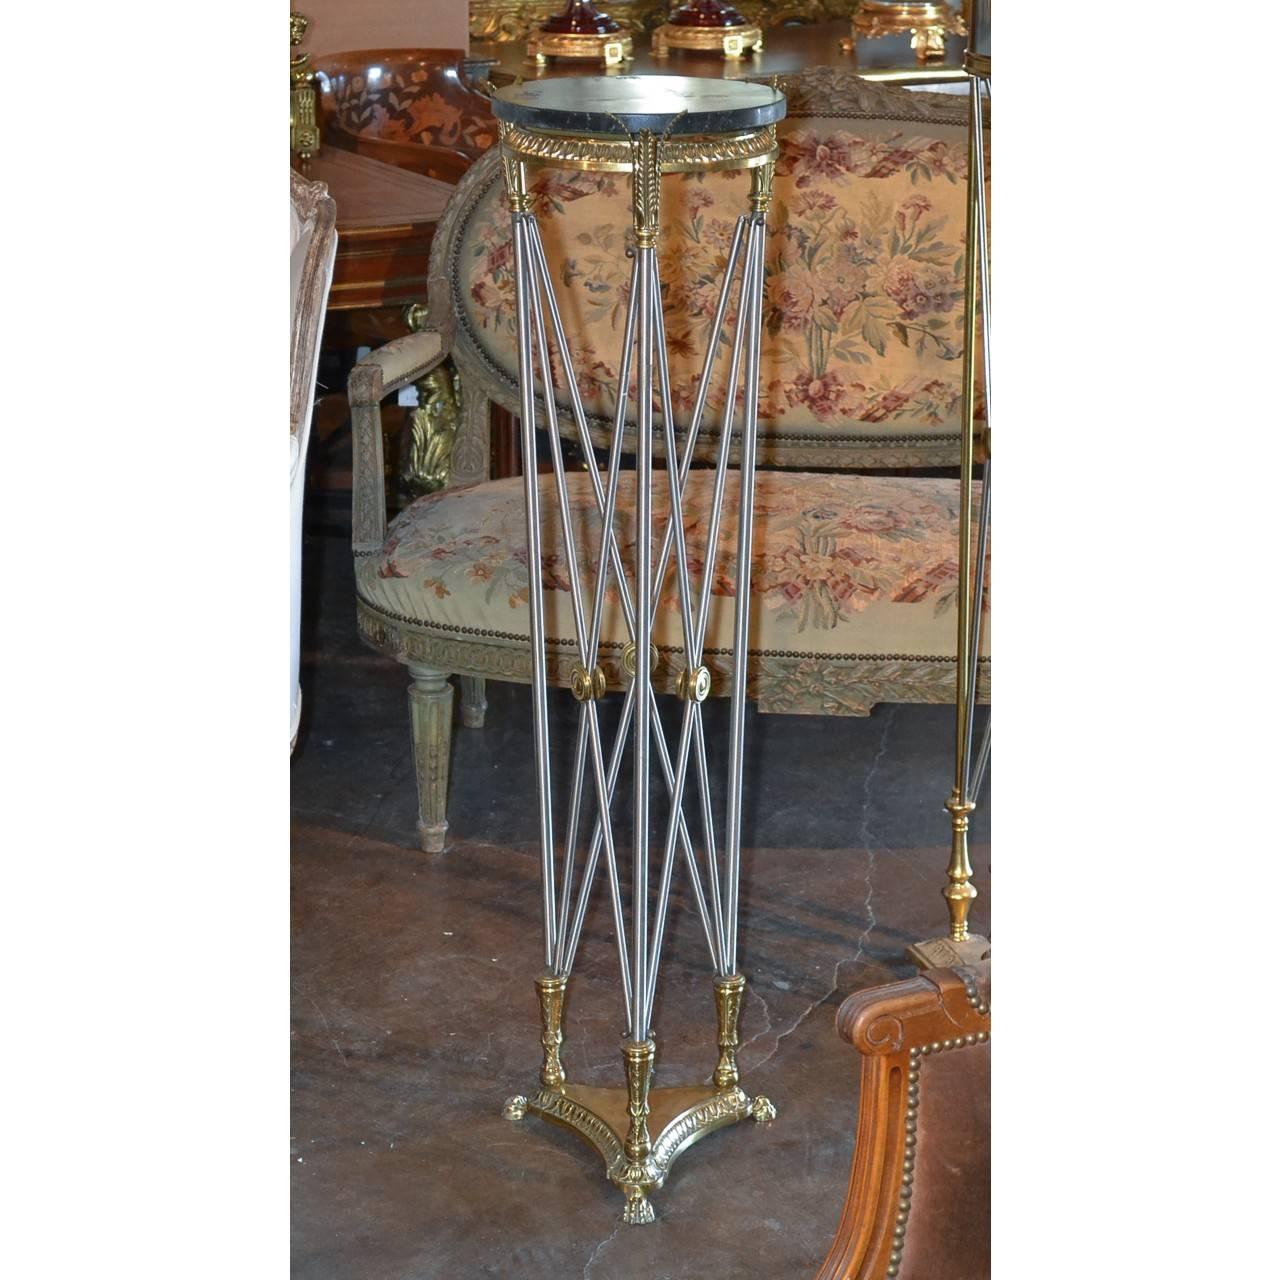 Midcentury French Directoire Style Steel and Brass Pedestal 2